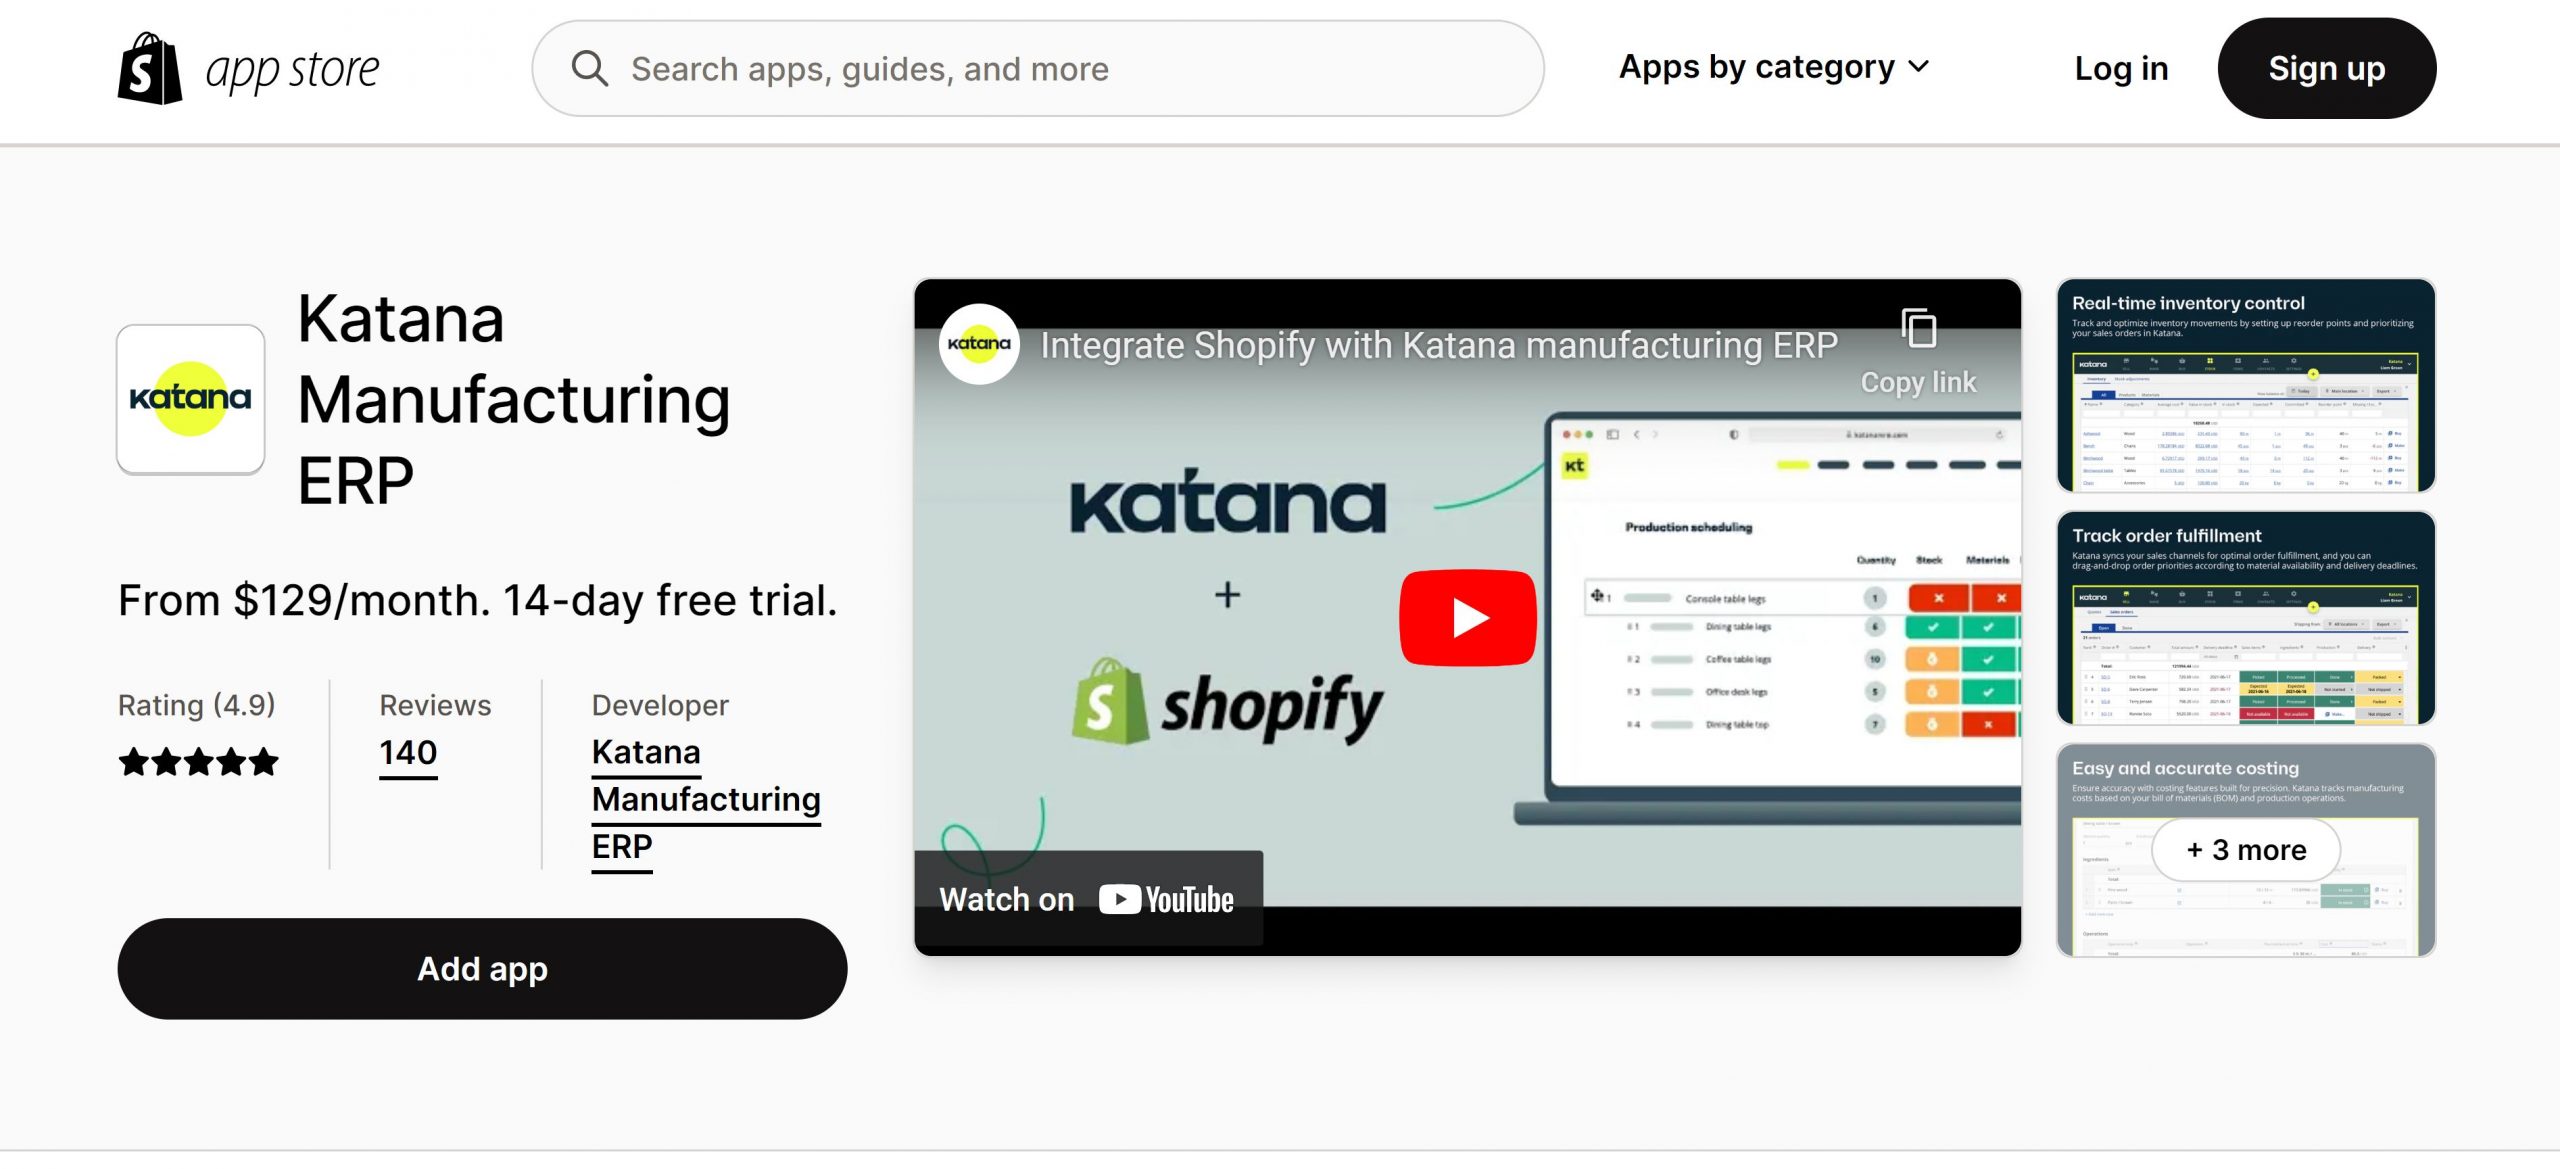 Katana manufacturing software on the Shopify app store.